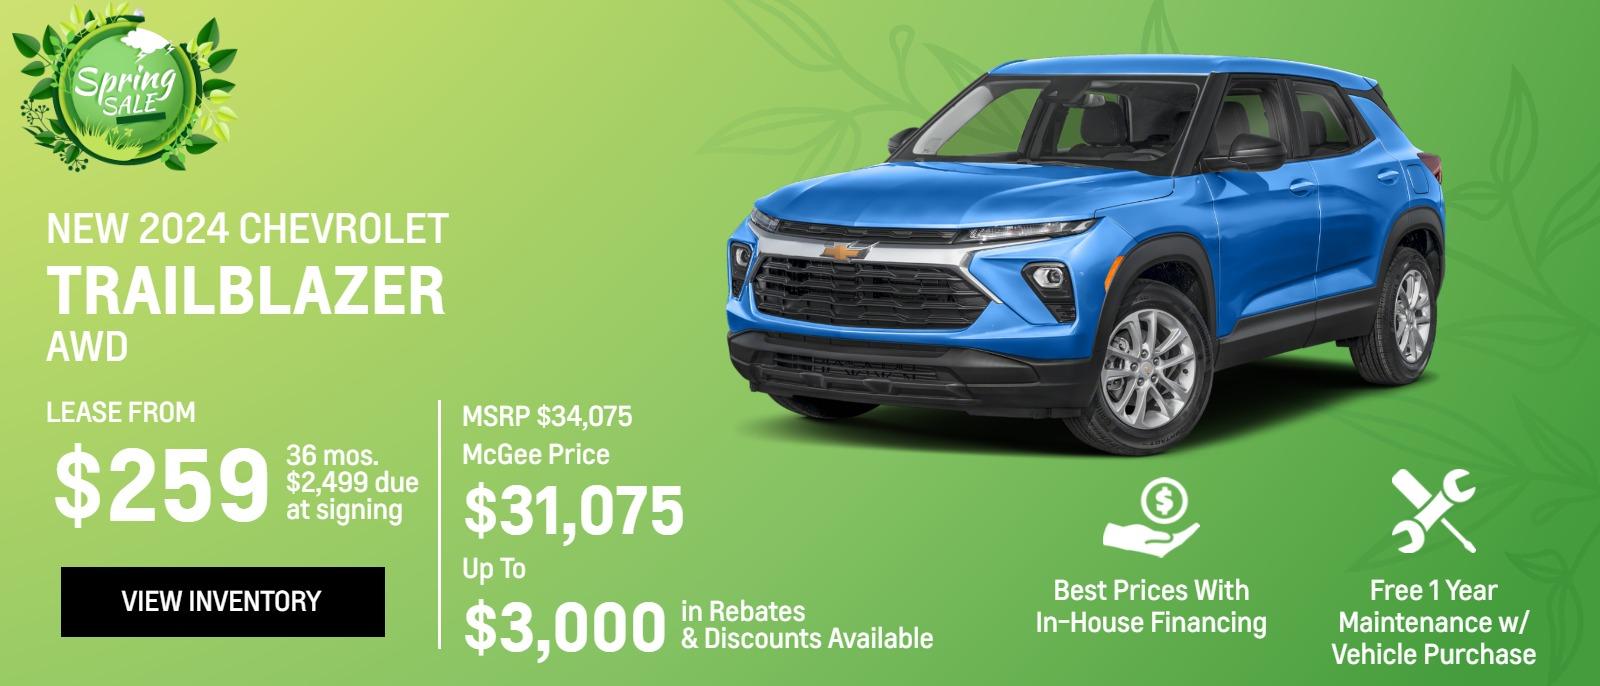 New 2024 Chevrolet
Trailblazer AWD

Lease From
$259
36 mos.
$2,499 due
at signing

MSRP $34,075
McGee Price
$31,075
Up To
$3,000 
in Rebates
&Discounts Available

Best Prices With In-House Financing

Free 1 Year Maintenance
w/ Vehicle Purchase